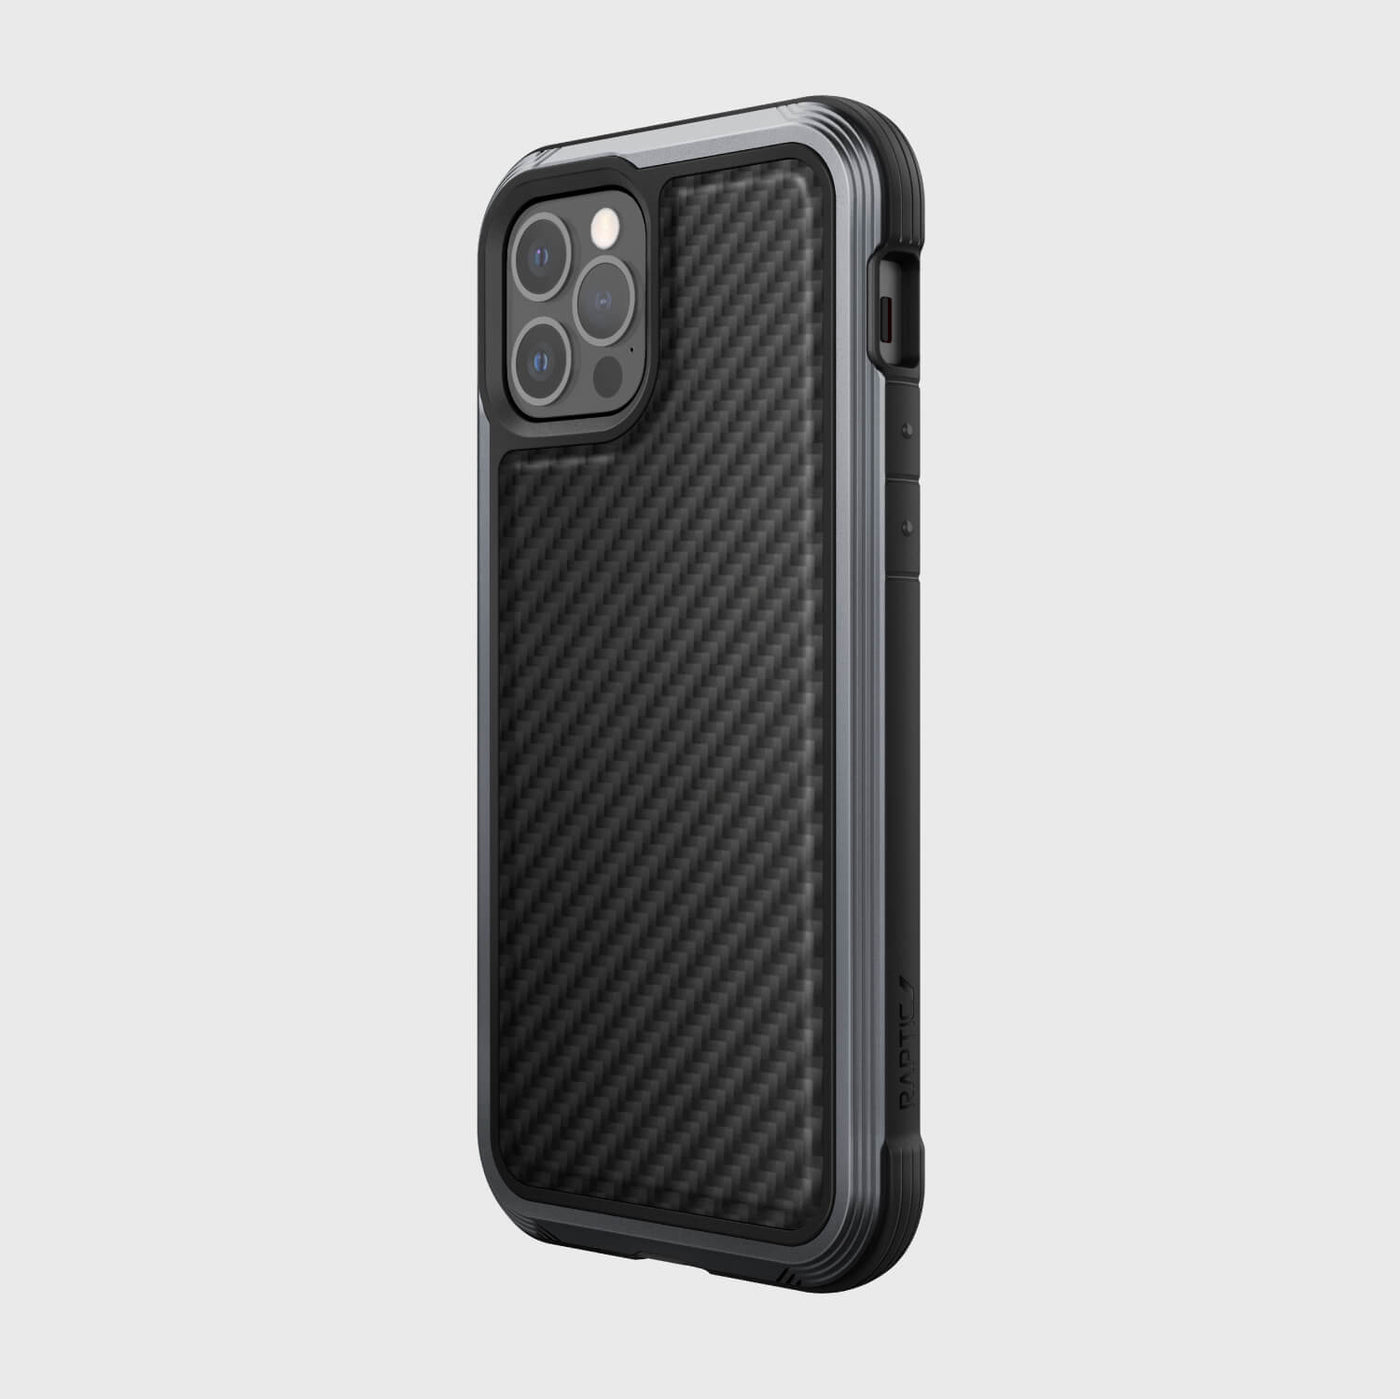 Luxurious Case for iPhone 12 & iPhone 12 Pro. Raptic Lux in black carbon fiber.